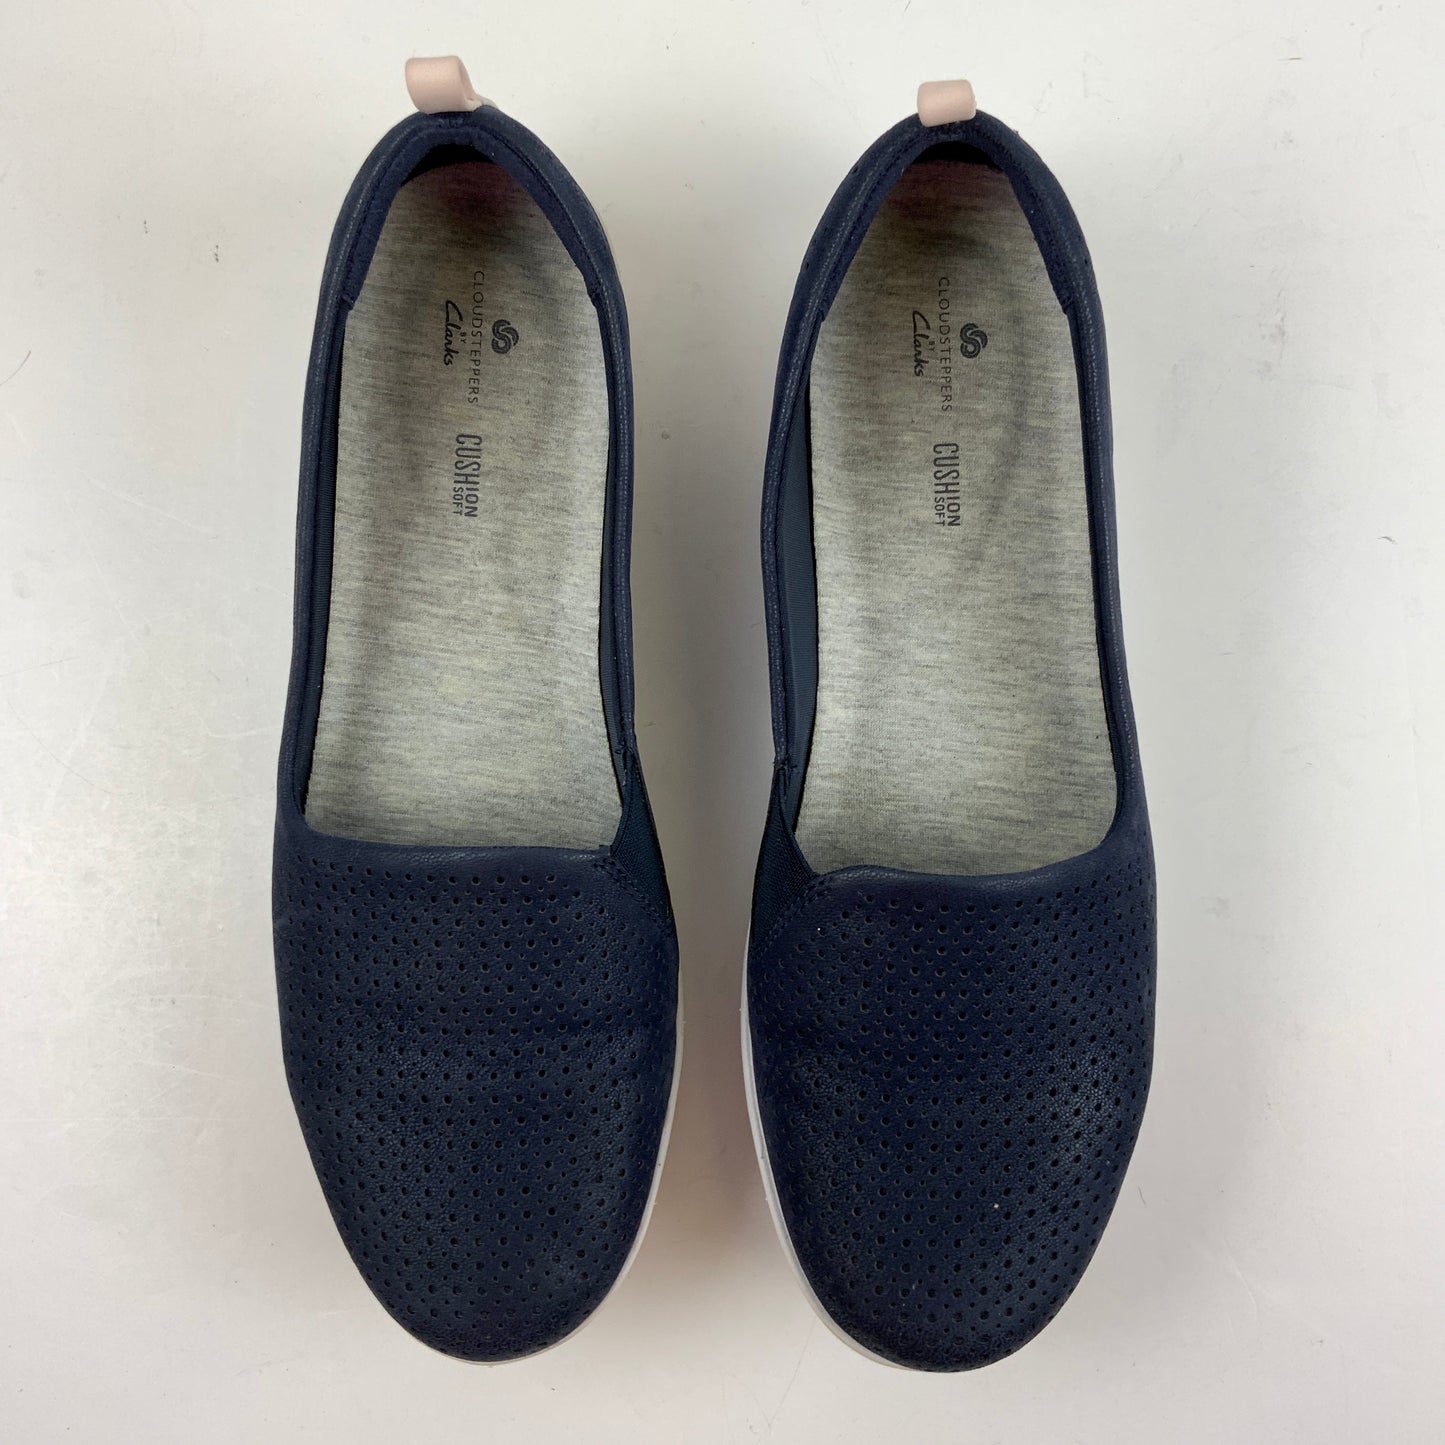 Shoes Flats Loafer Oxford By Clarks  Size: 10